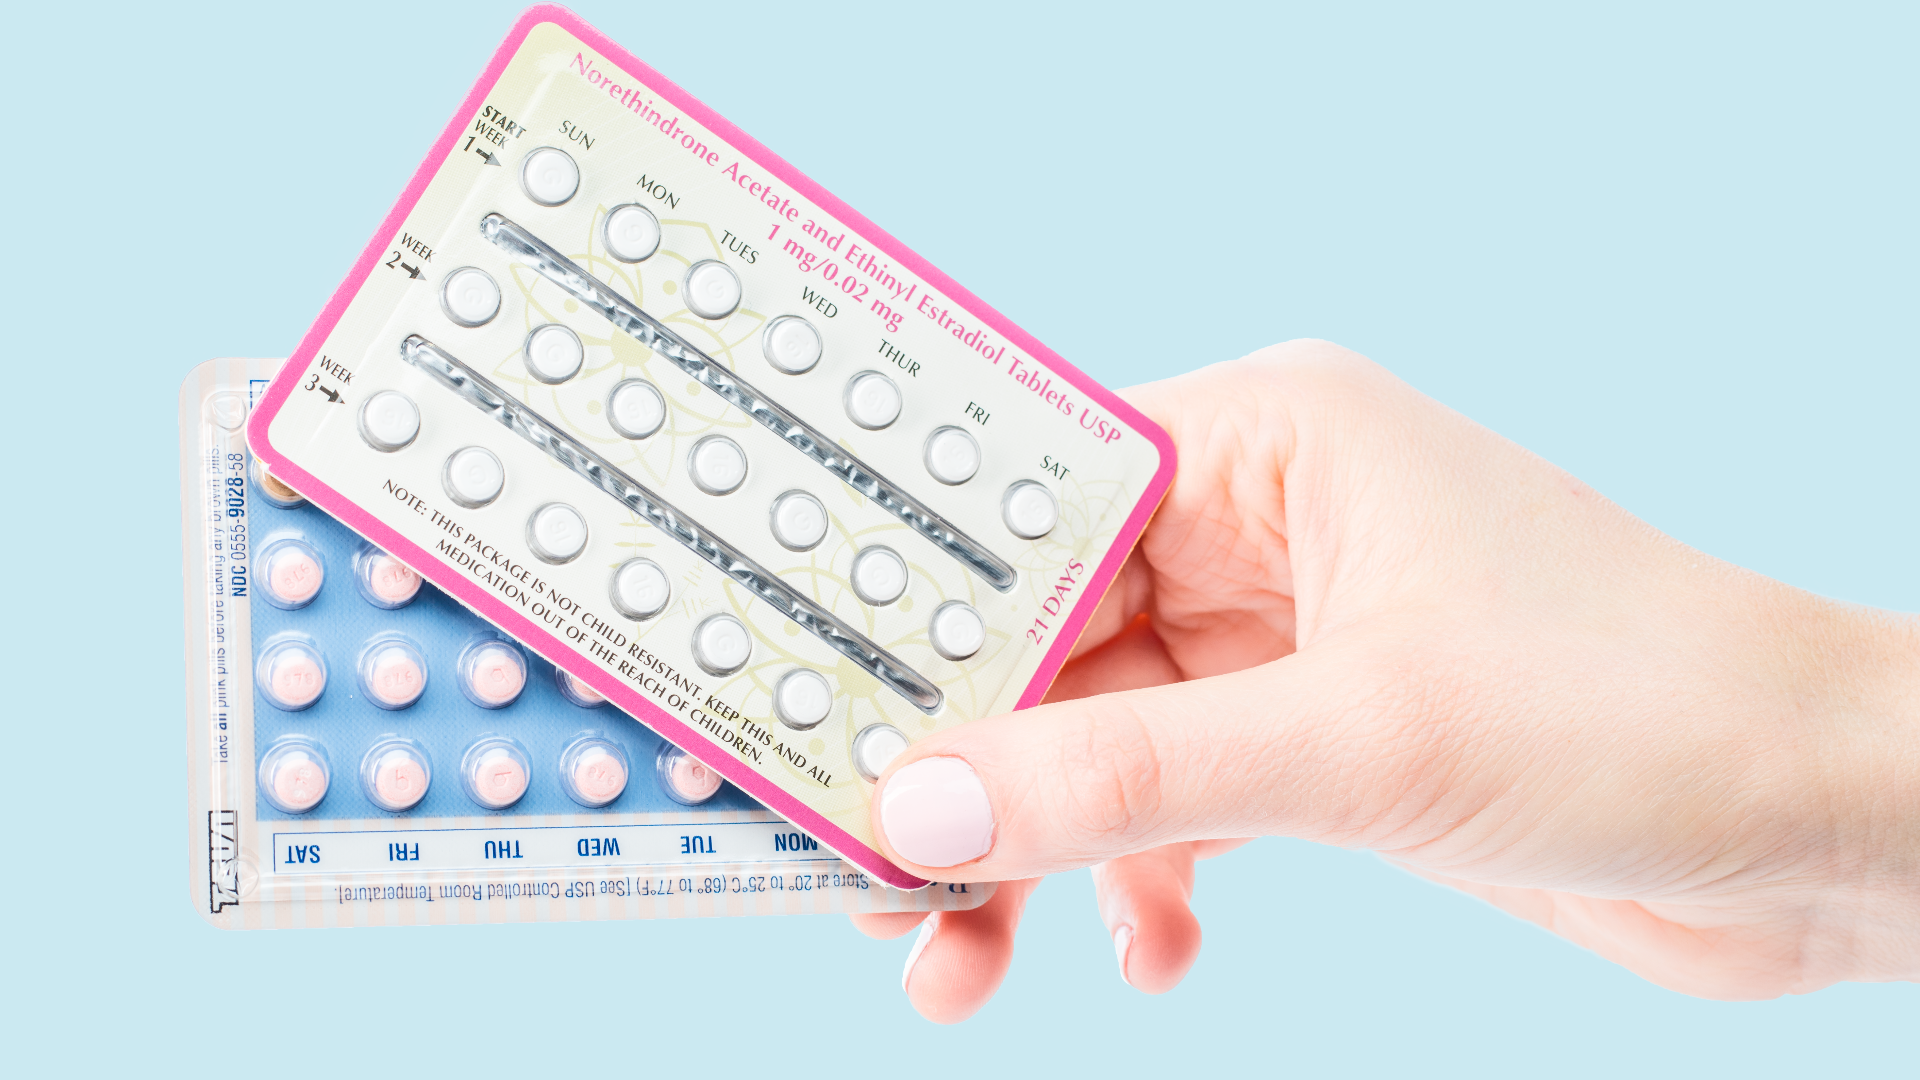 The coronavirus pandemic has caused an increase in online shopping. But one viewer wants to know if birth control pills ordered via app are safe and effective.